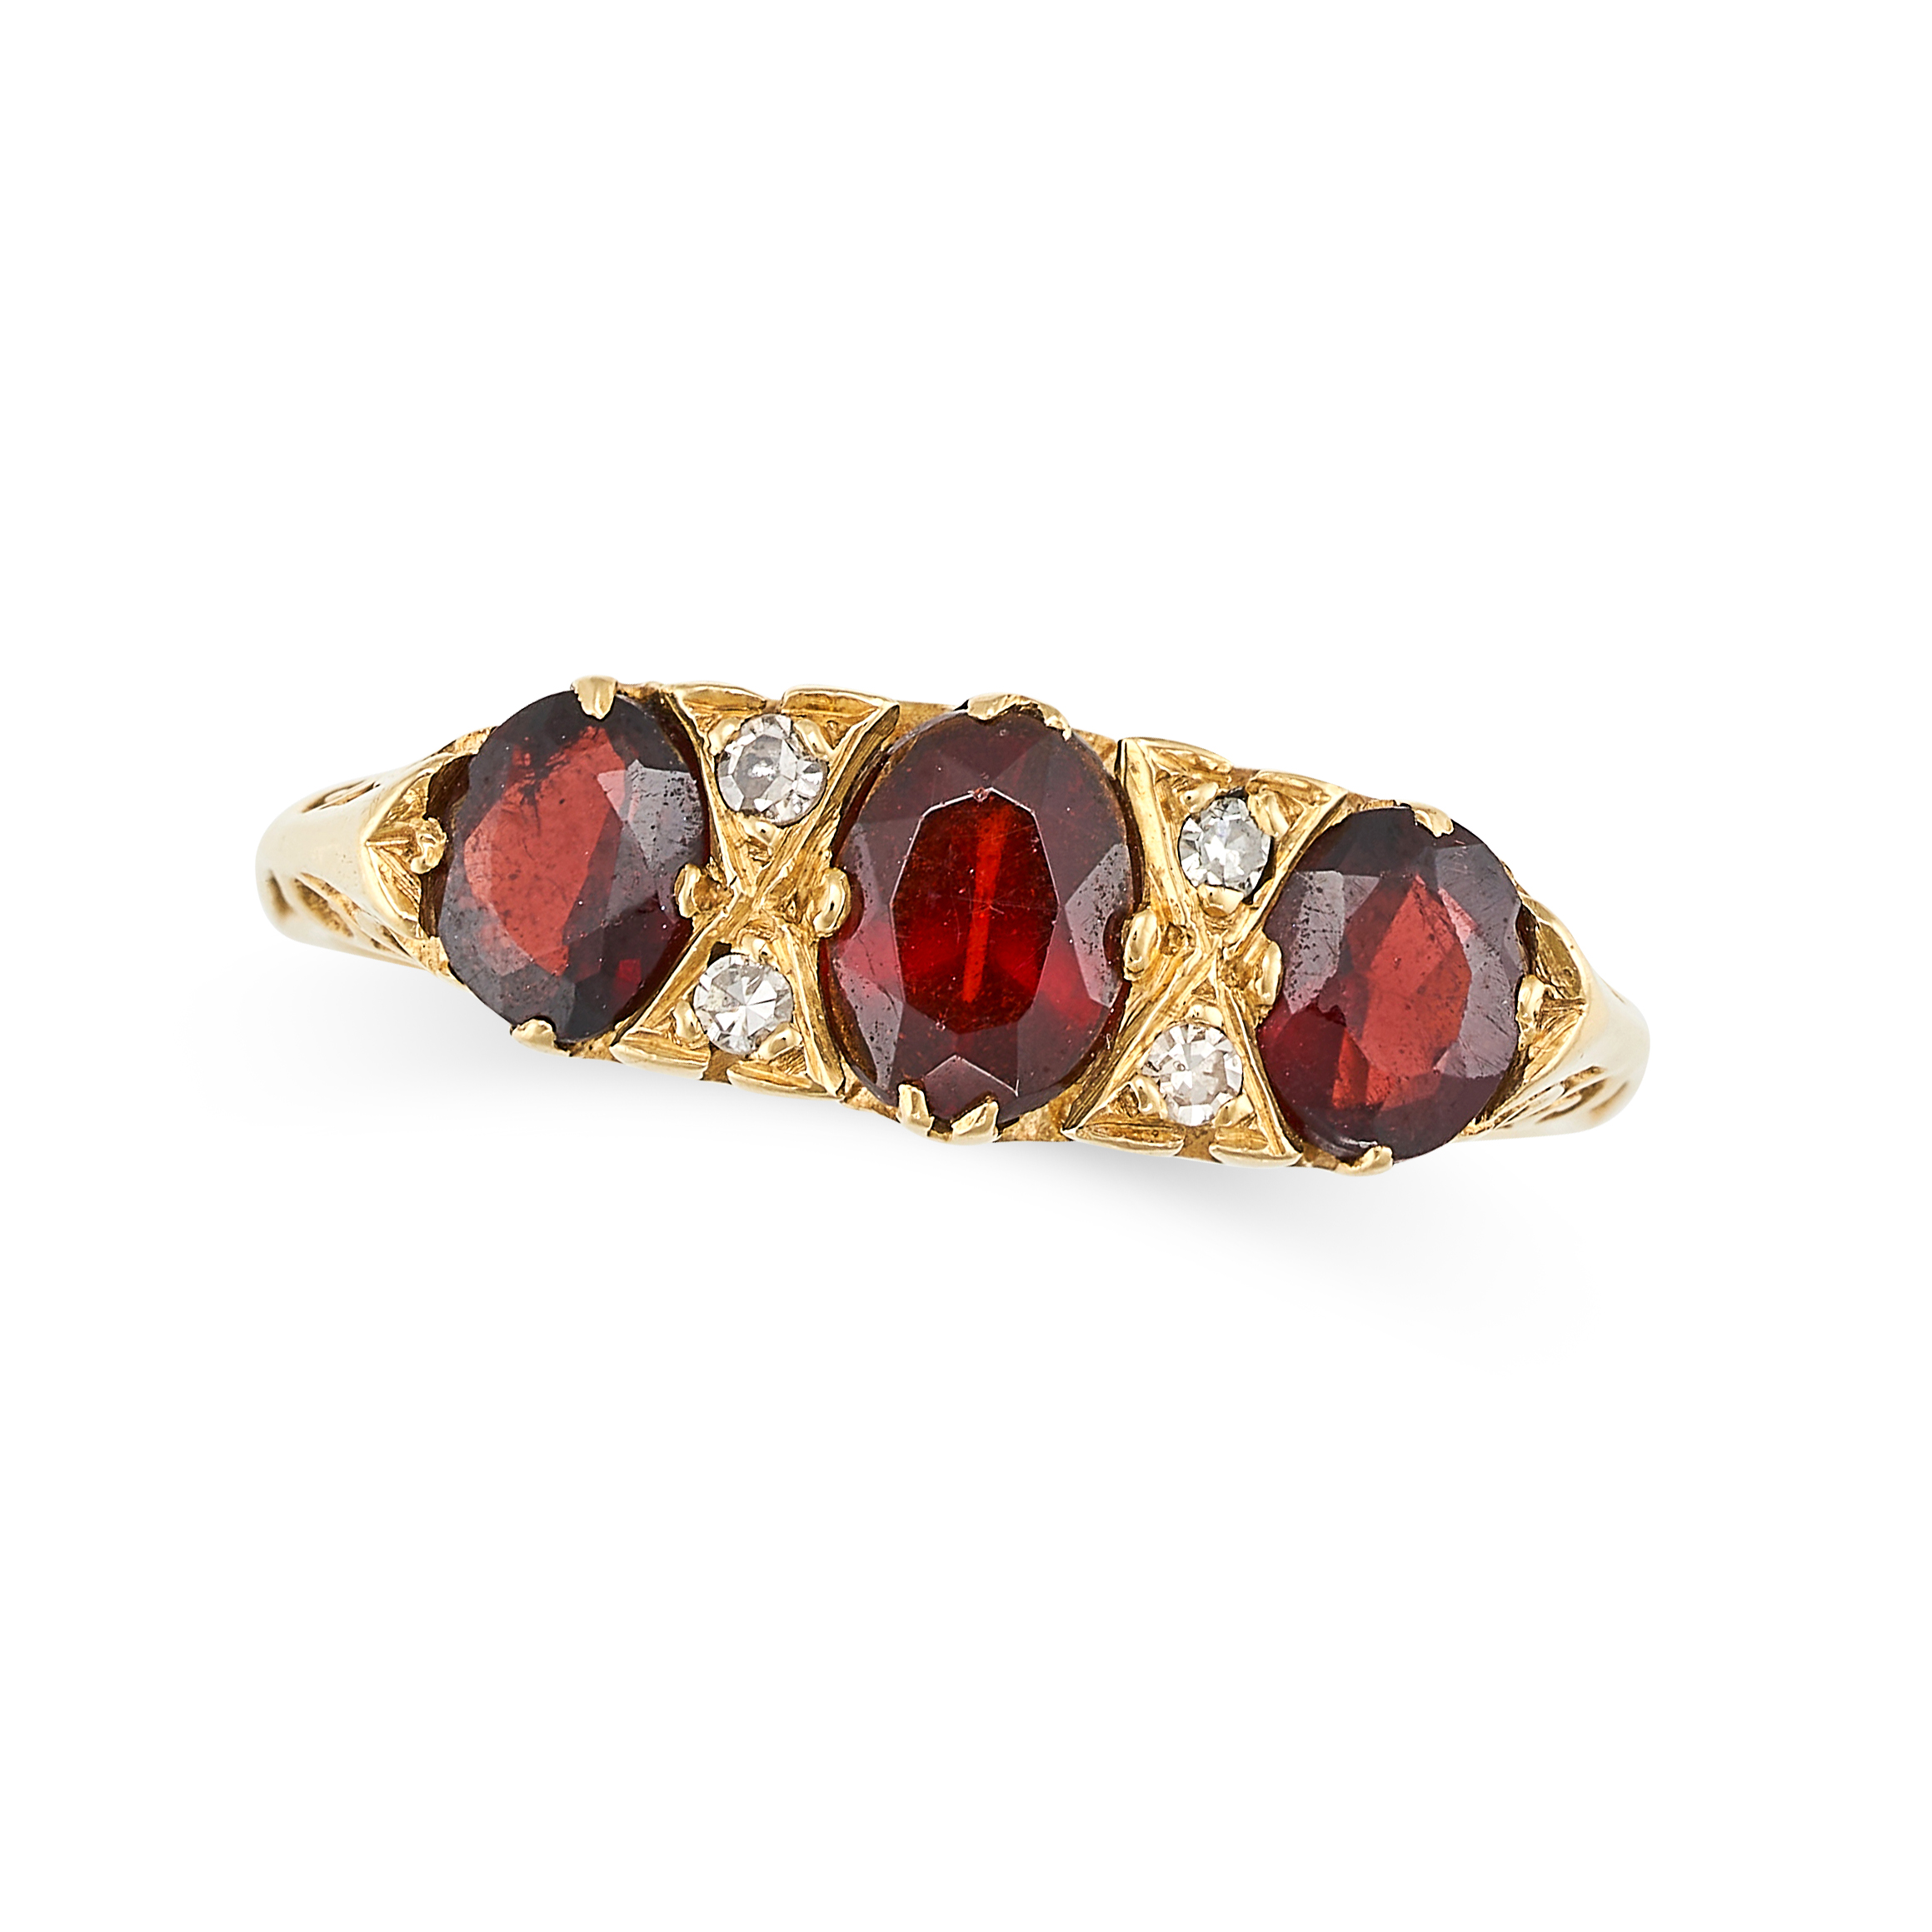 A VINTAGE GARNET AND DIAMOND RING in 18ct yellow gold, set with three oval cut garnets punctuated...